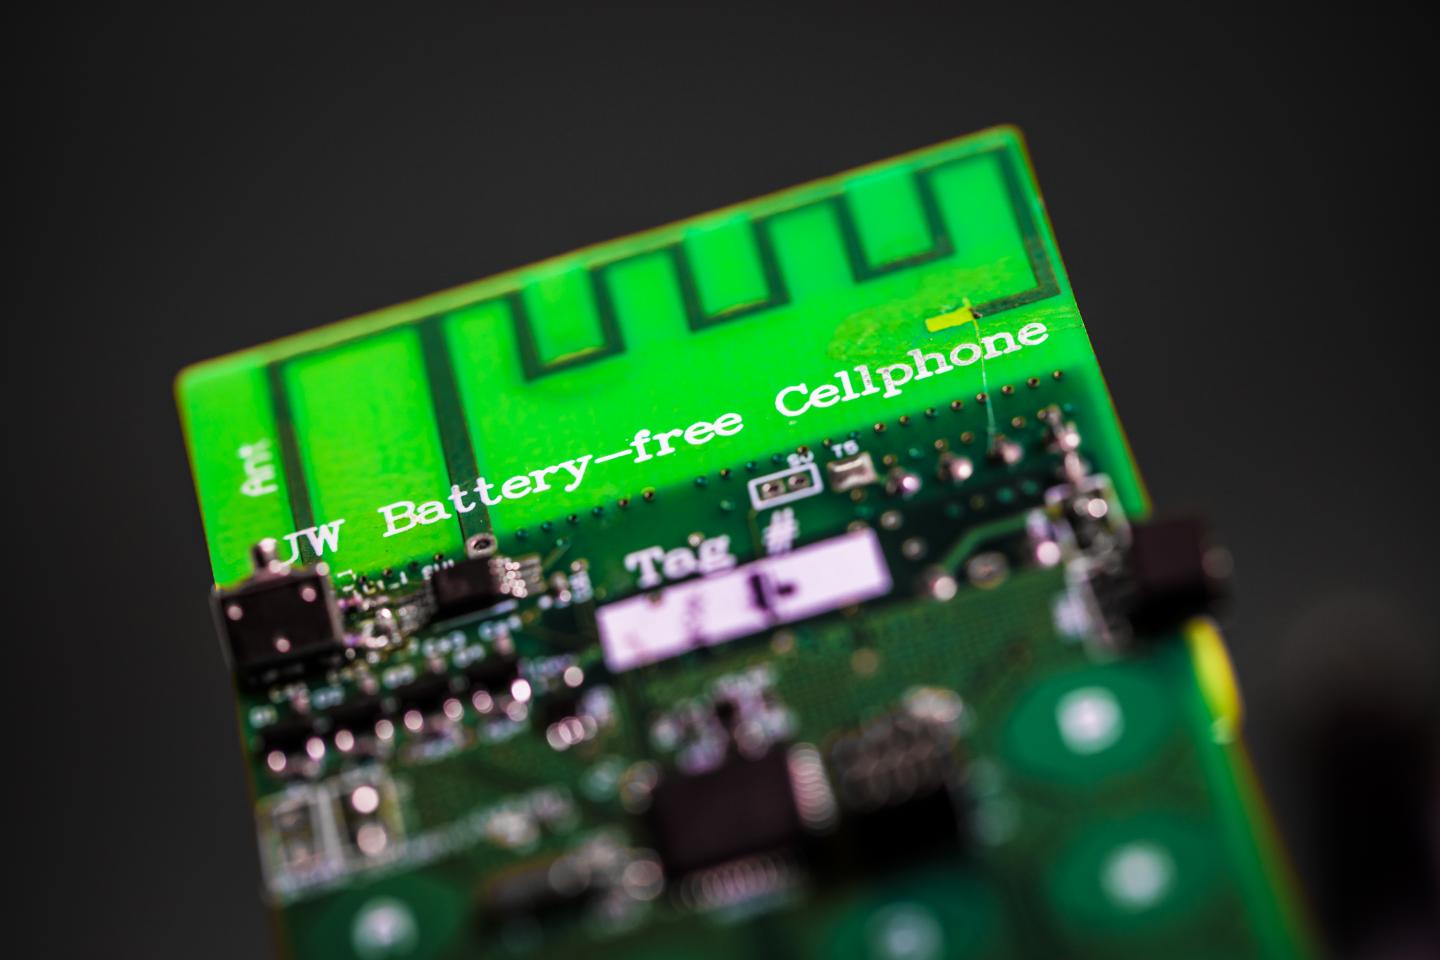 UW engineers have designed the first battery-free cellphone that can send and receive calls using only a few microwatts of power. (Mark Stone/University of Washington)